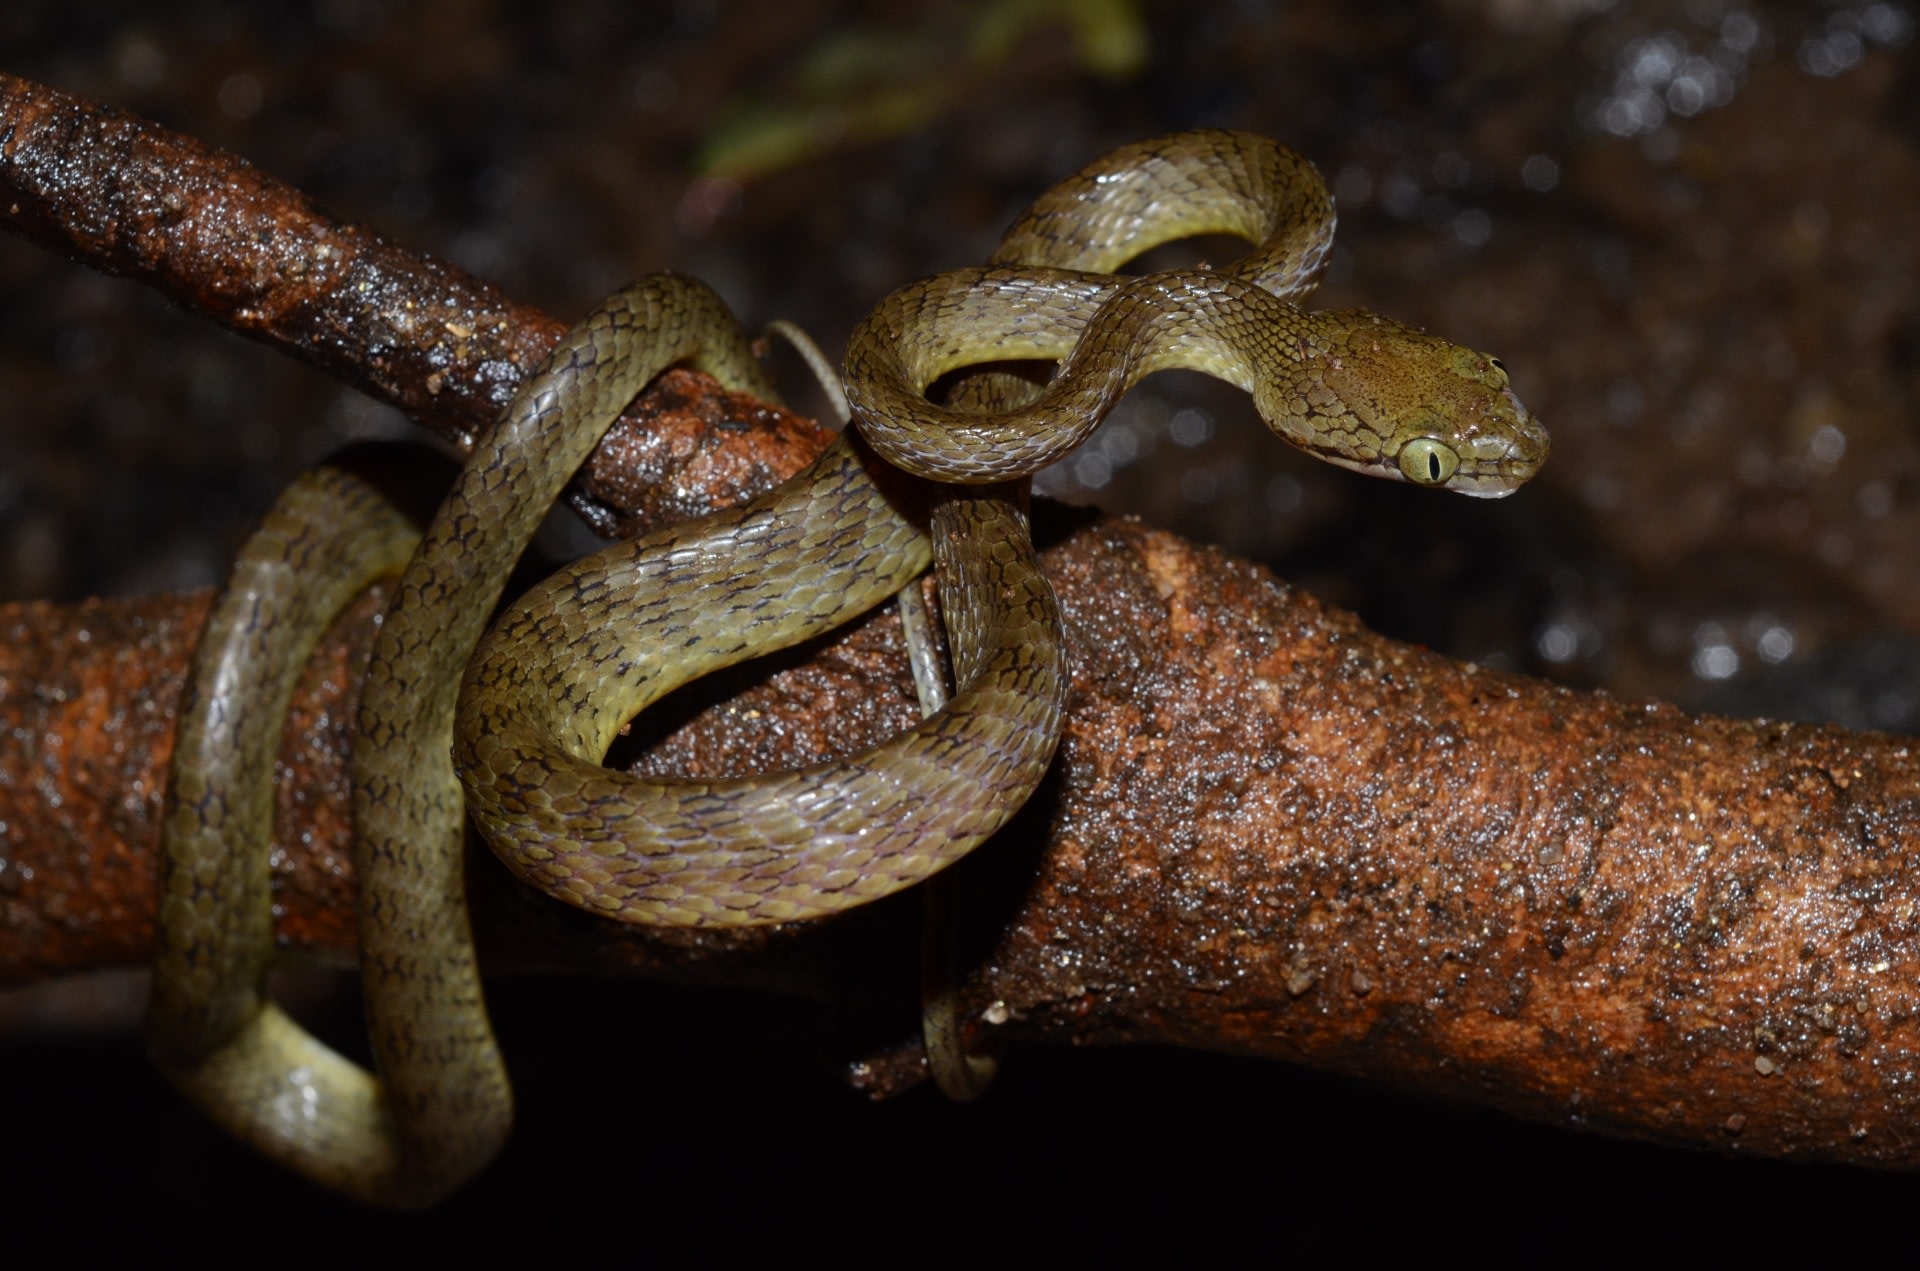 Found in the hills of the Western Ghats, mainly in dense tree cover and bushes, Beddome’s cat snake is a shy, nocturnal, tree-dwelling snake that usually rests or hides in tree holes, dense bushes, and under rocks. Photo: Avrajjal Ghosh